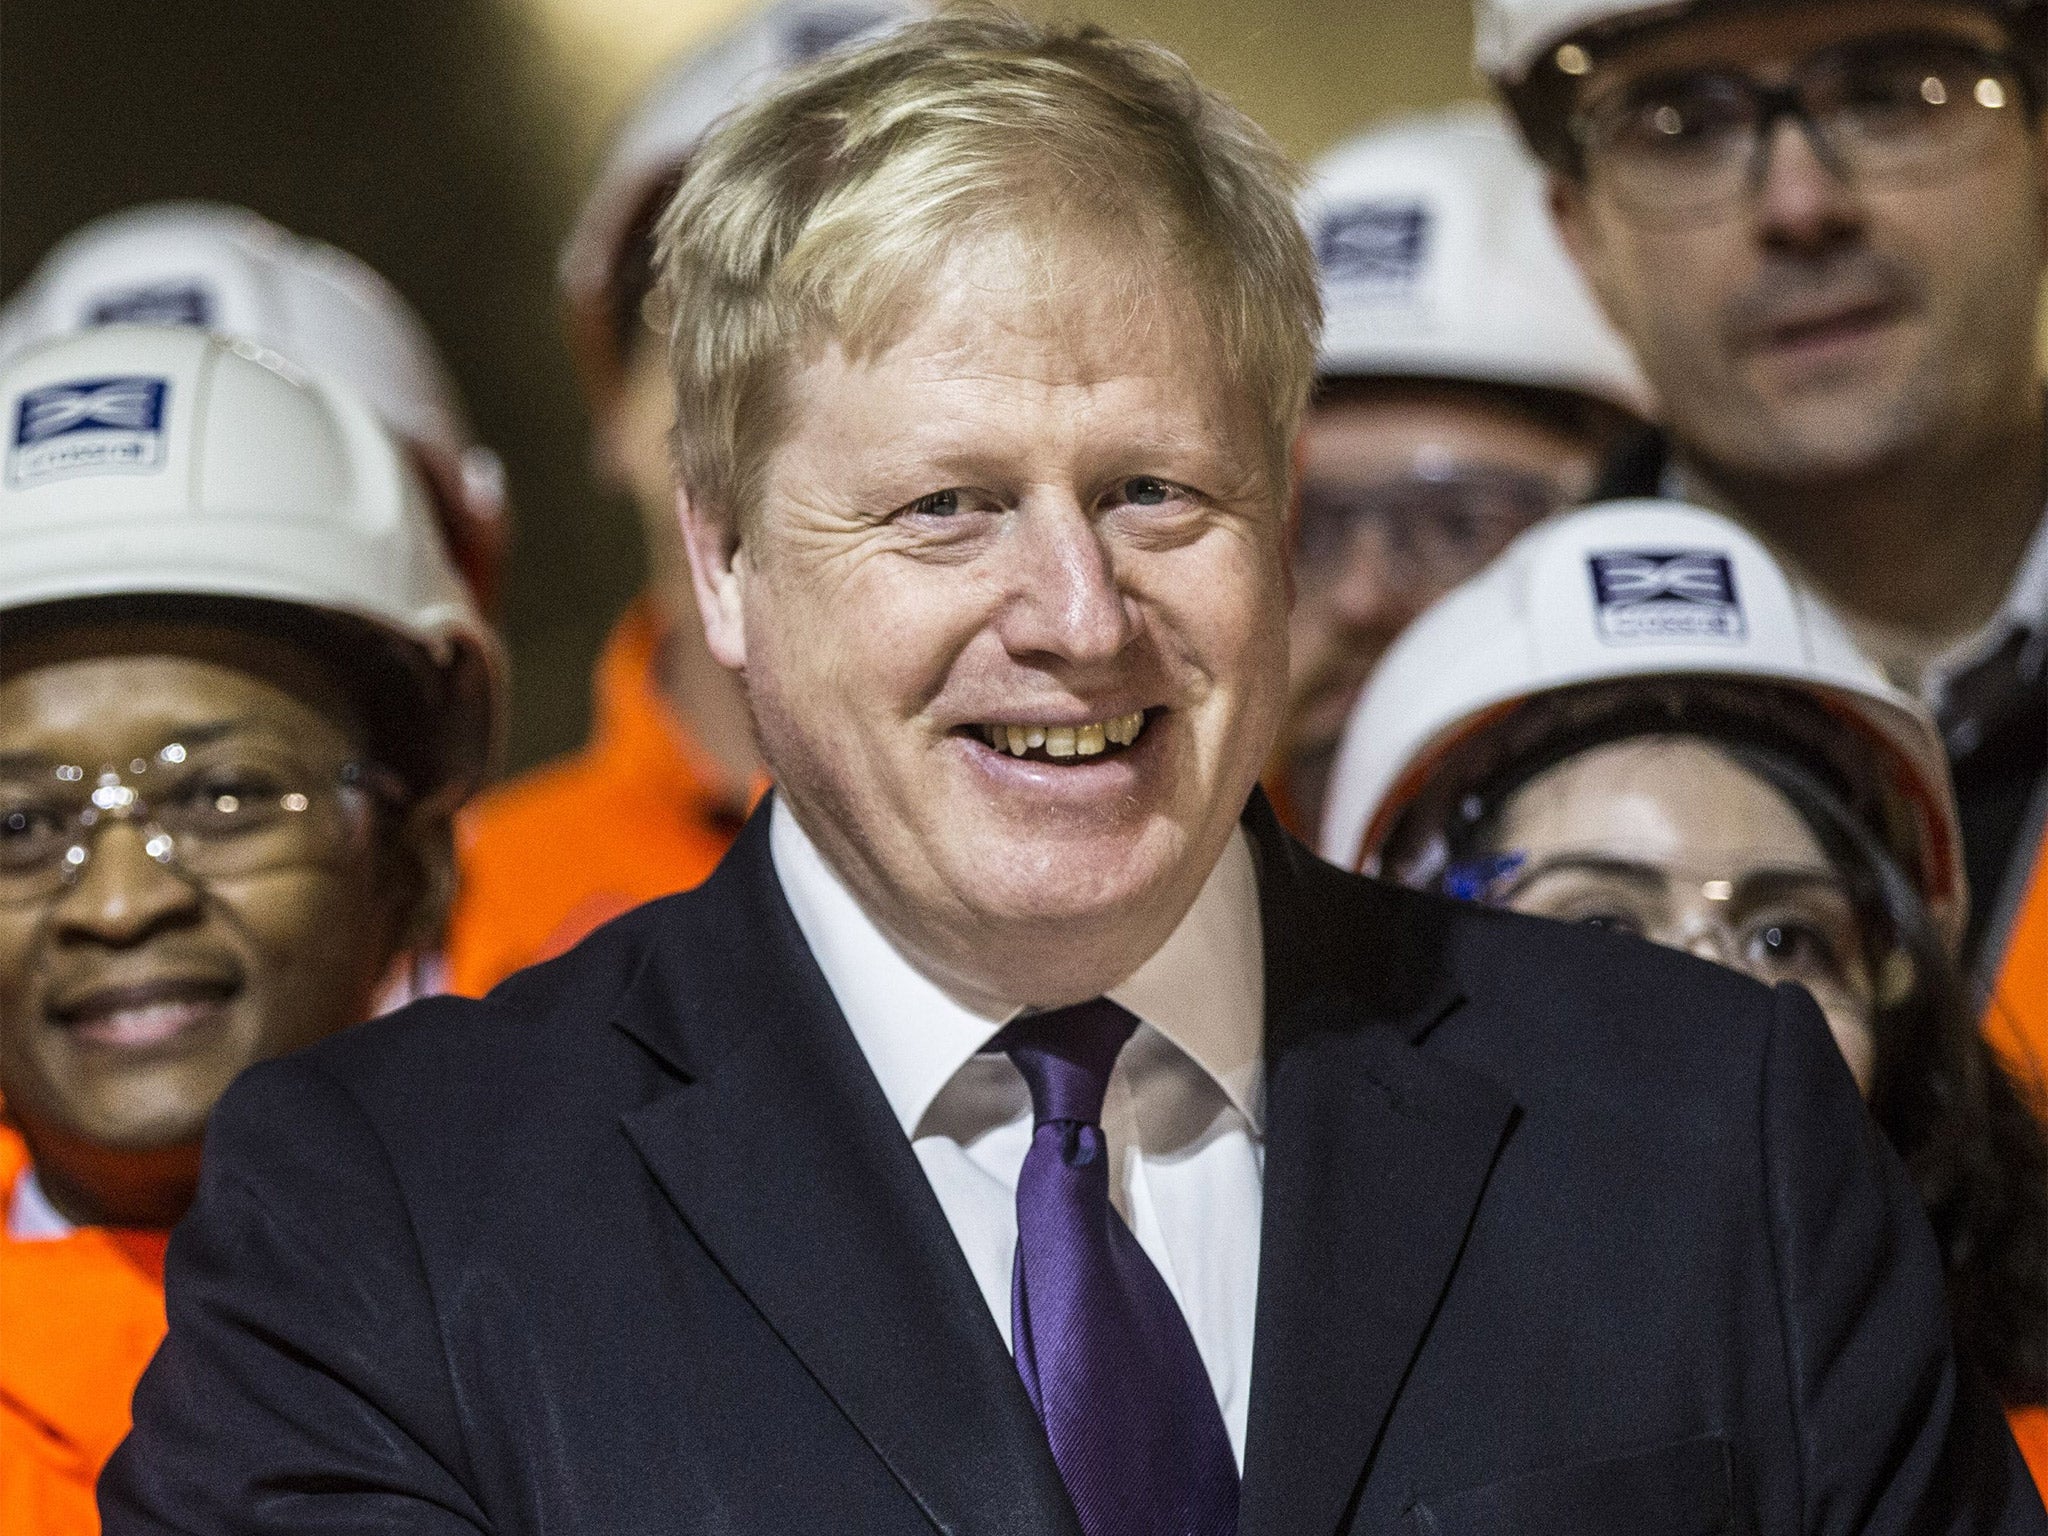 Boris Johnson with workers at the new Crossrail Bond Street station